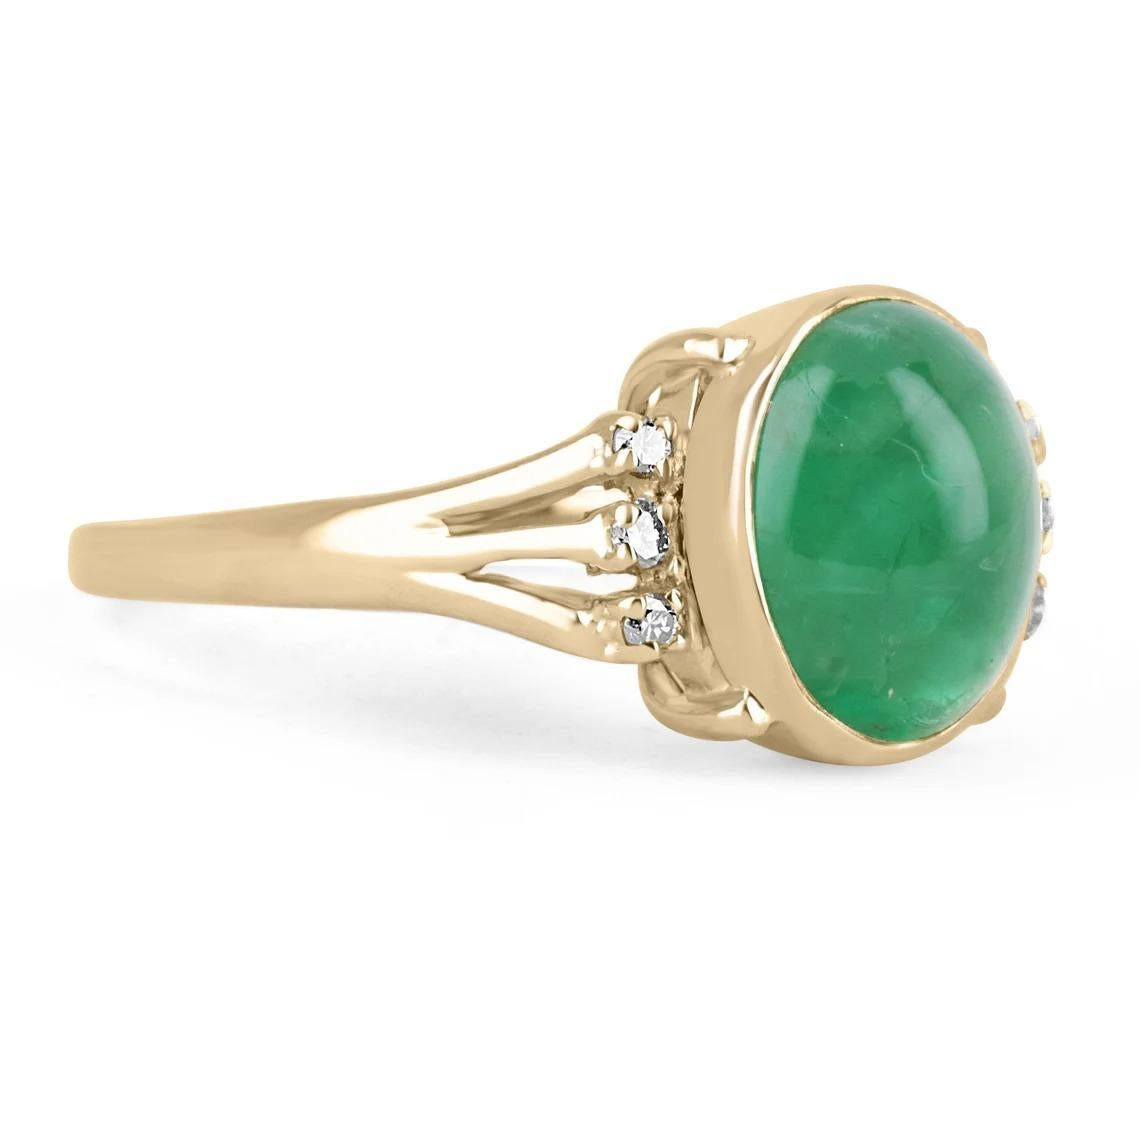 Featured is a lovely emerald cabochon & diamond ring. The center stone carries a 3.33-carat, natural emerald cabochon, displaying a gorgeous green color and very good luster. Accented on the sides are dainty, brillaint round diamonds prong-set. The